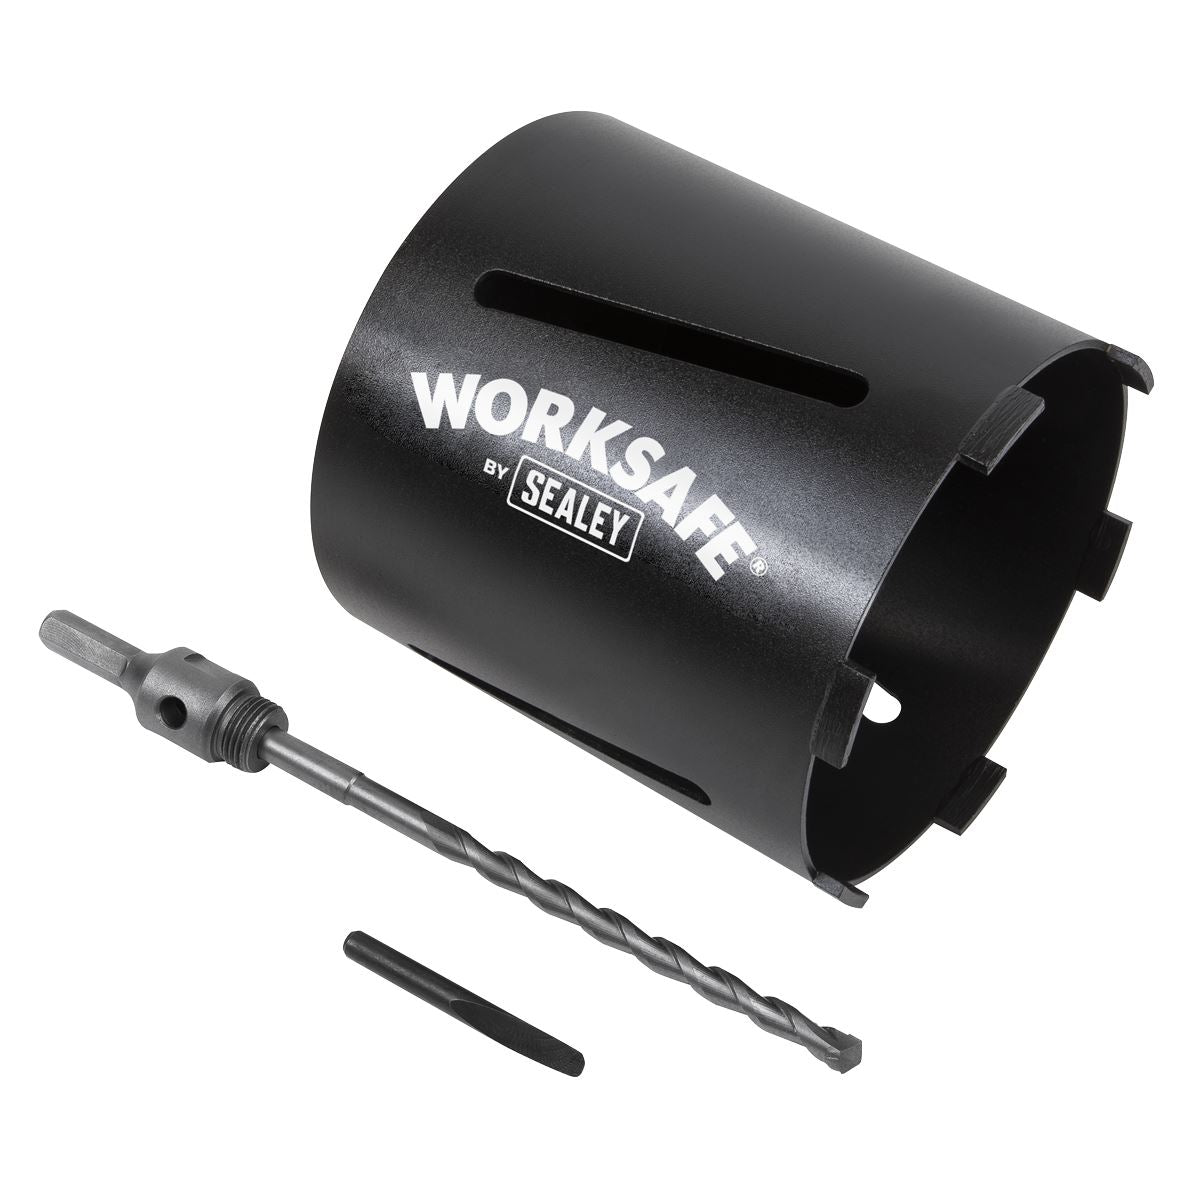 Worksafe by Sealey Core-to-Go Dry Diamond Core Drill Ø150mm x 150mm